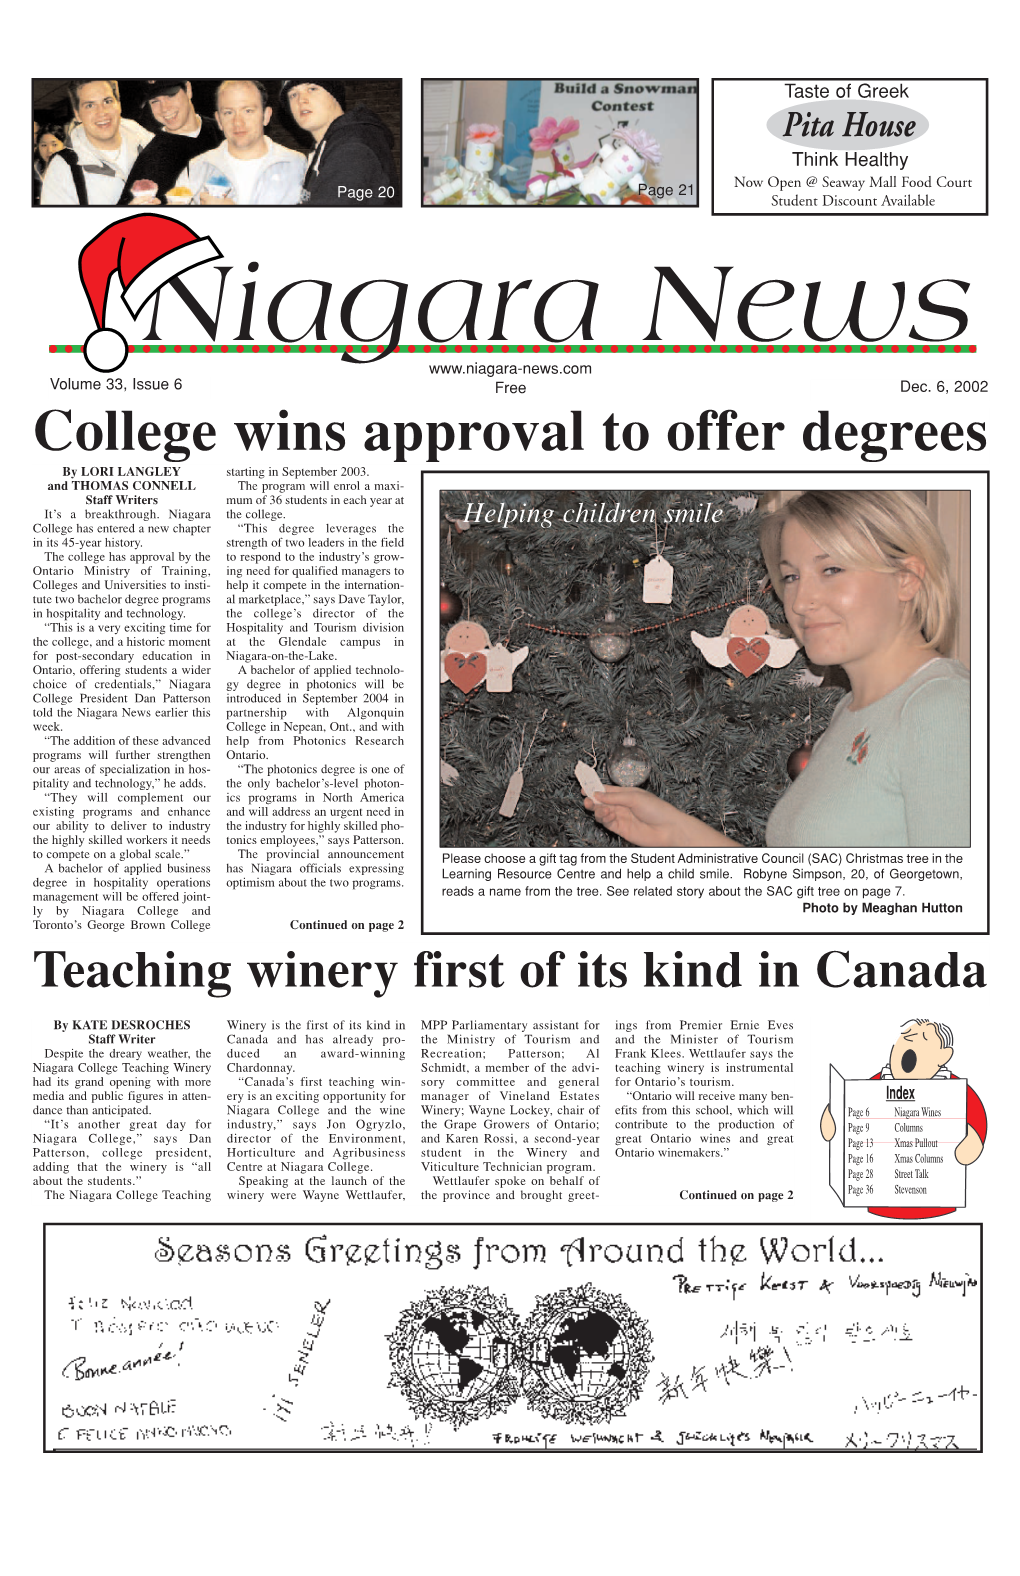 Niagara News College Wins Approval to Offer Degrees Teaching Winery